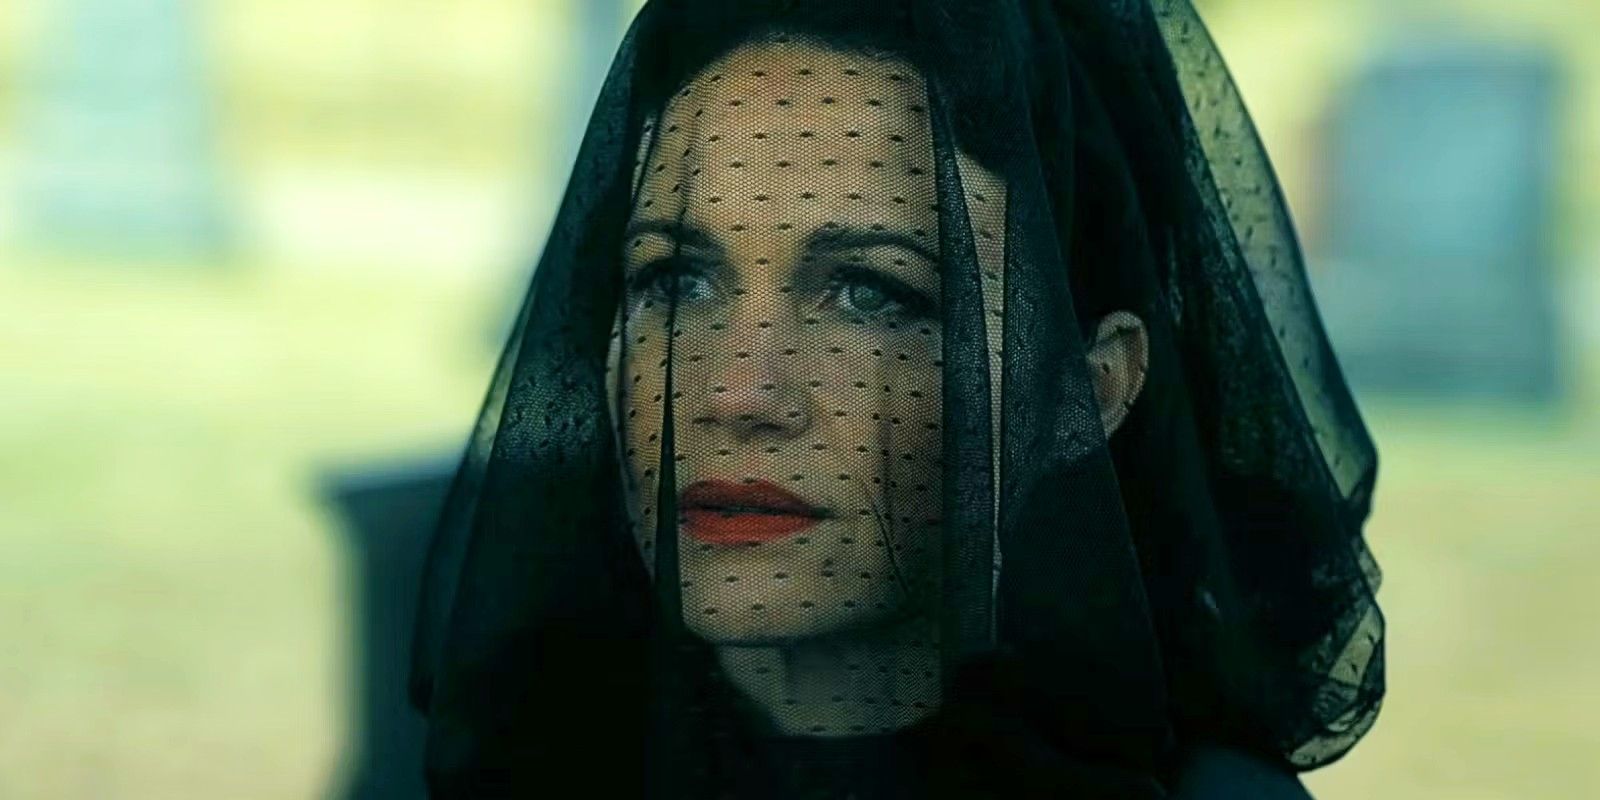 Carla Gugino as Verna in The Fall of the House of Usher ending